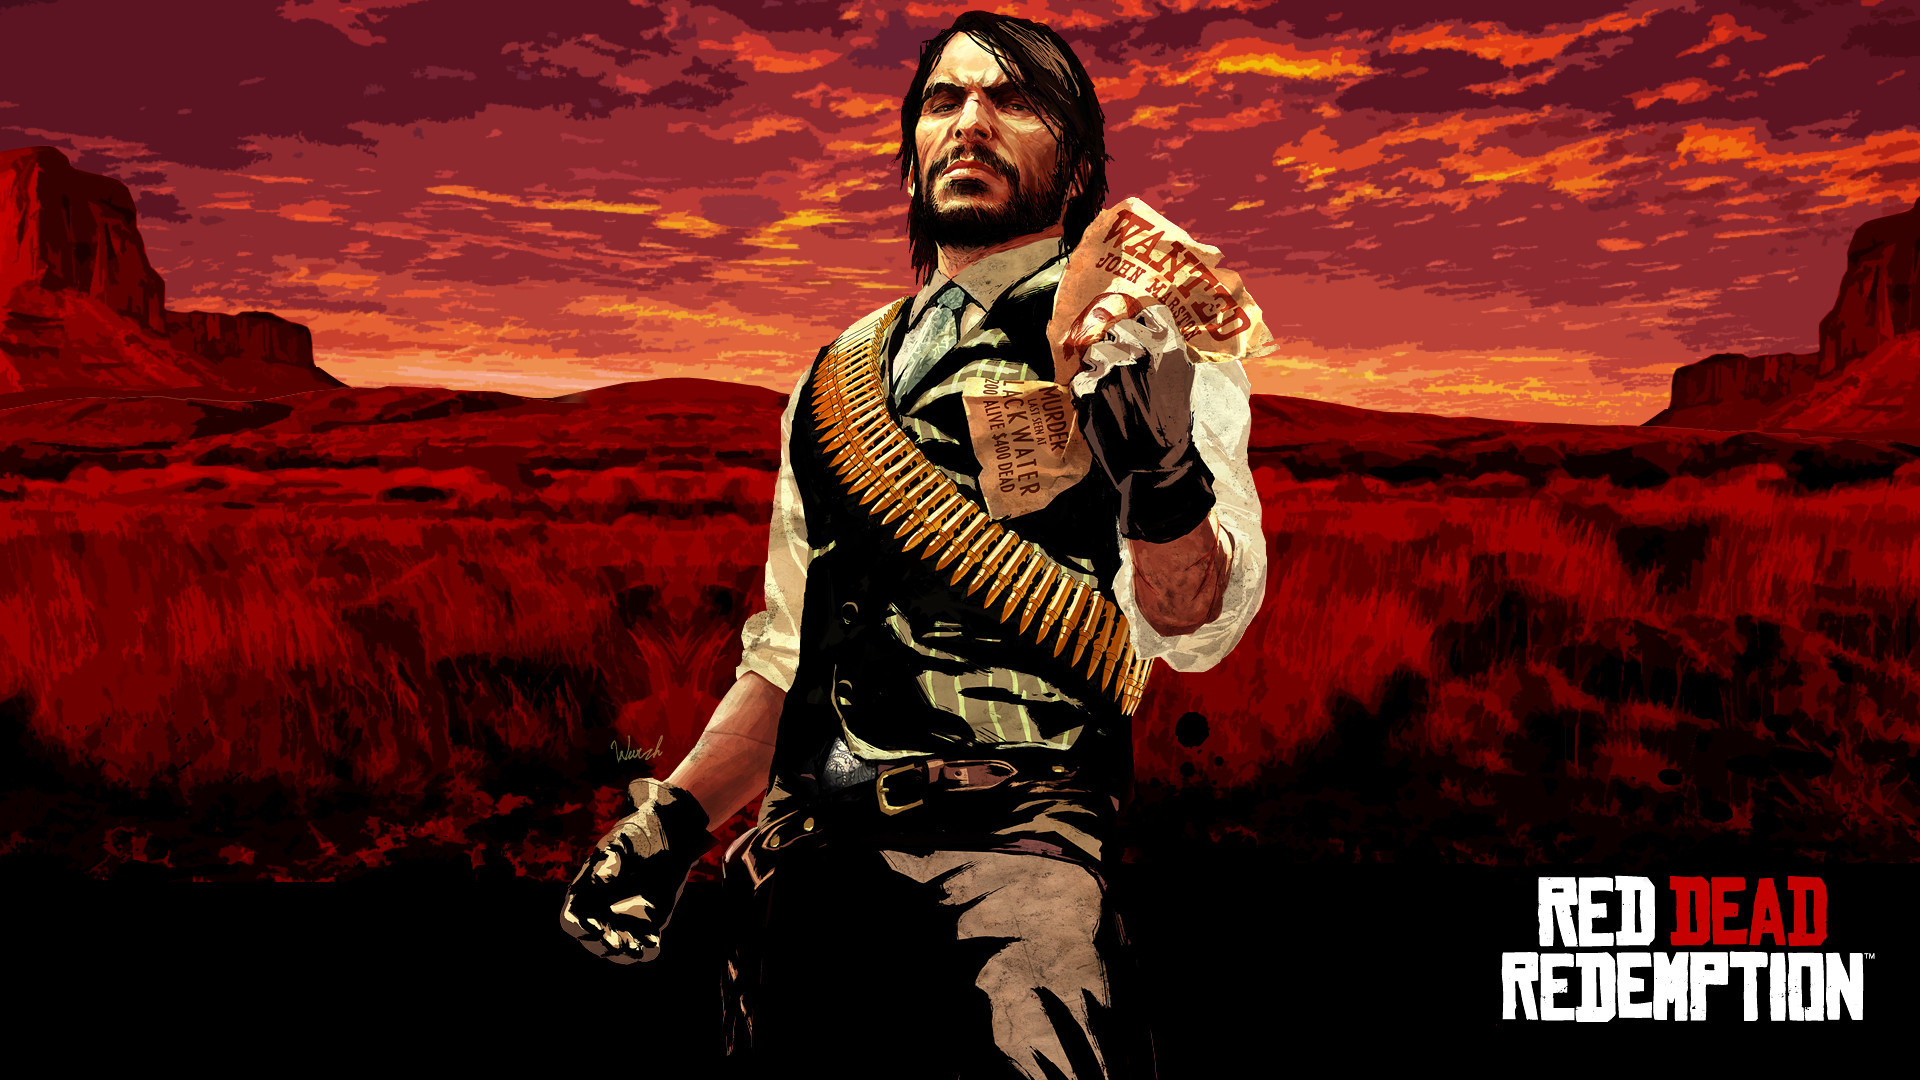 1920x1080  'Red Dead Redemption' Plays Host to Video Games' Most Compelling  Tragic Hero | Inverse. Download. Games John Marston ...